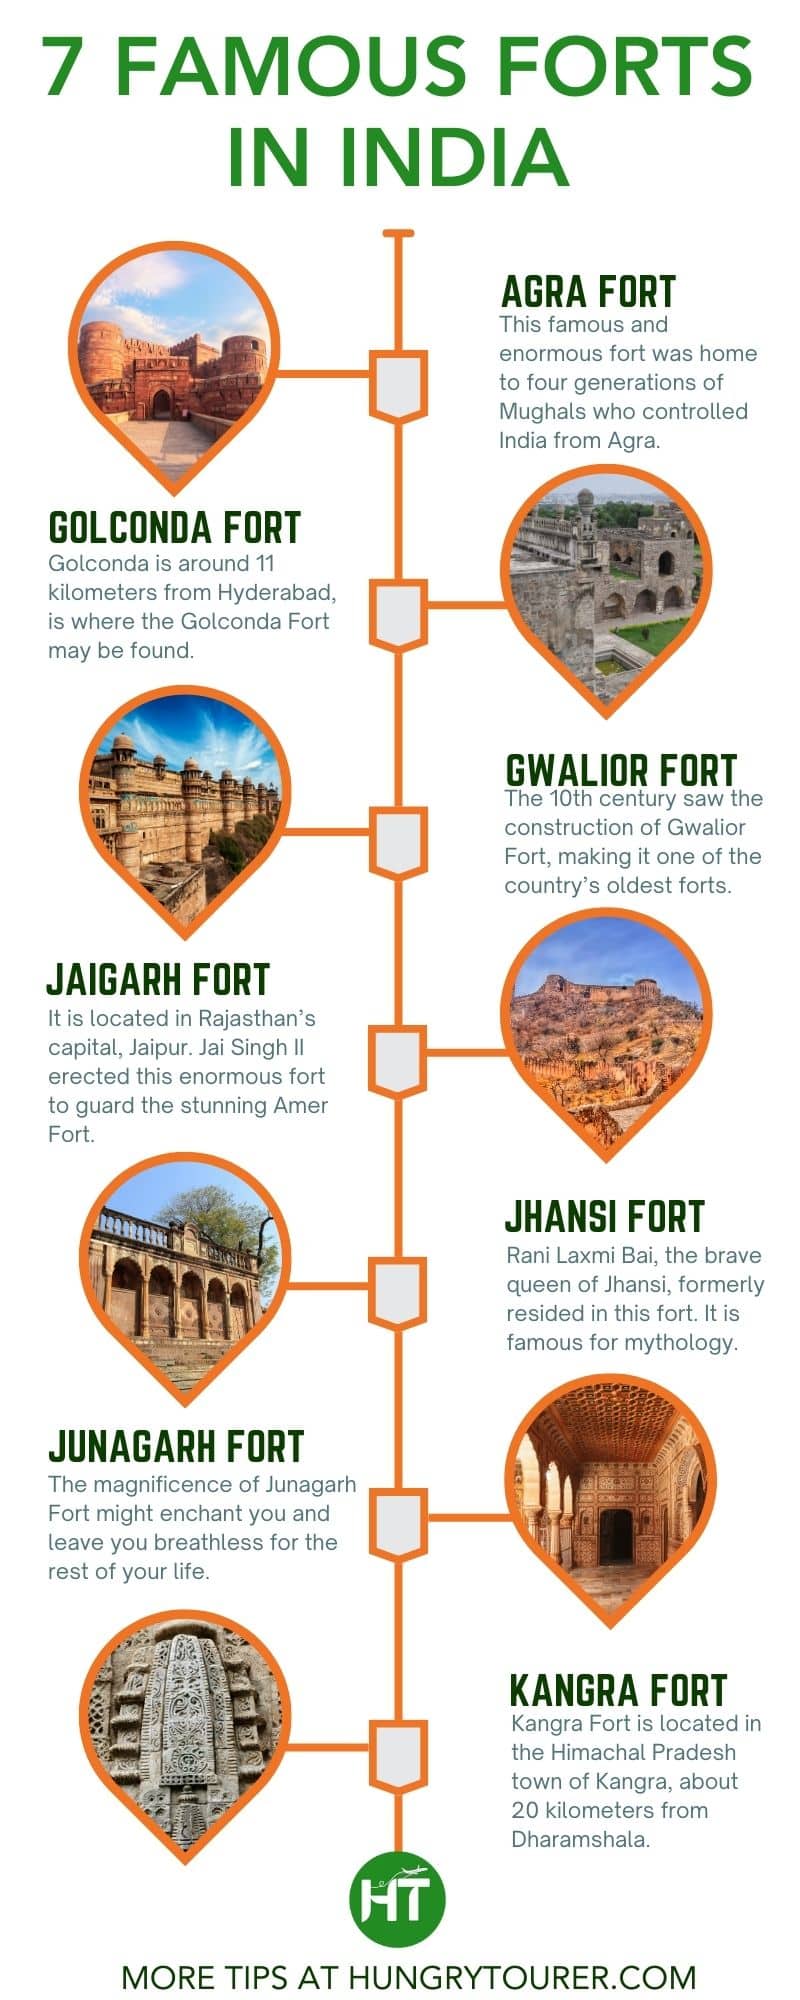 7 Famous Forts in India